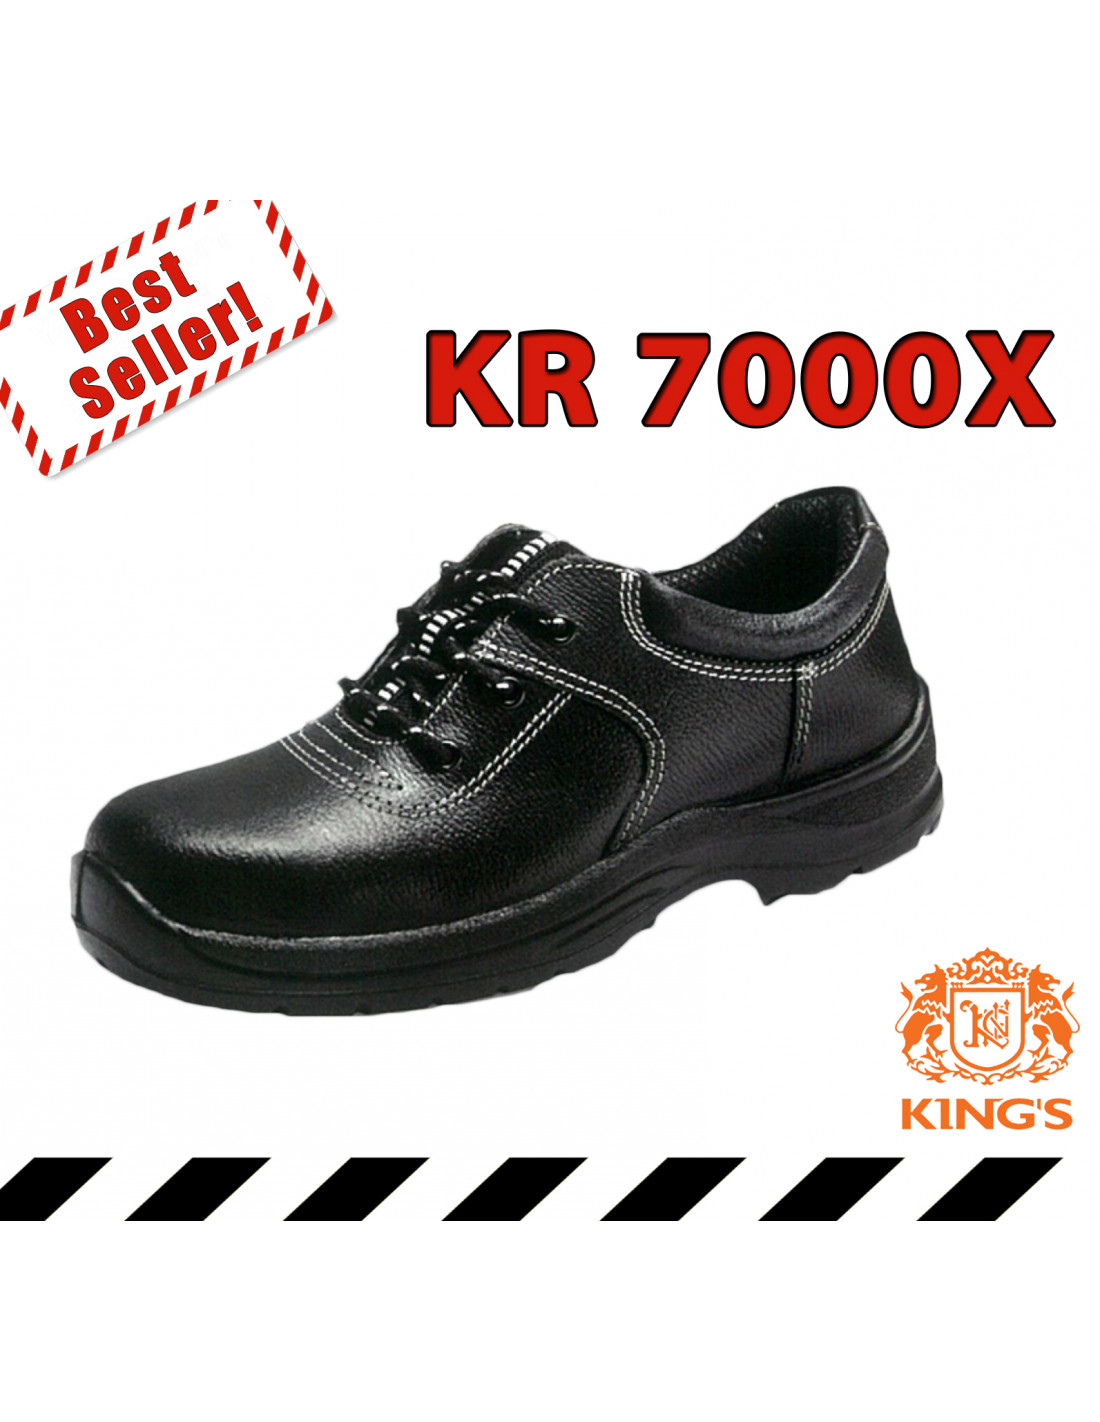 kings safety shoes supplier